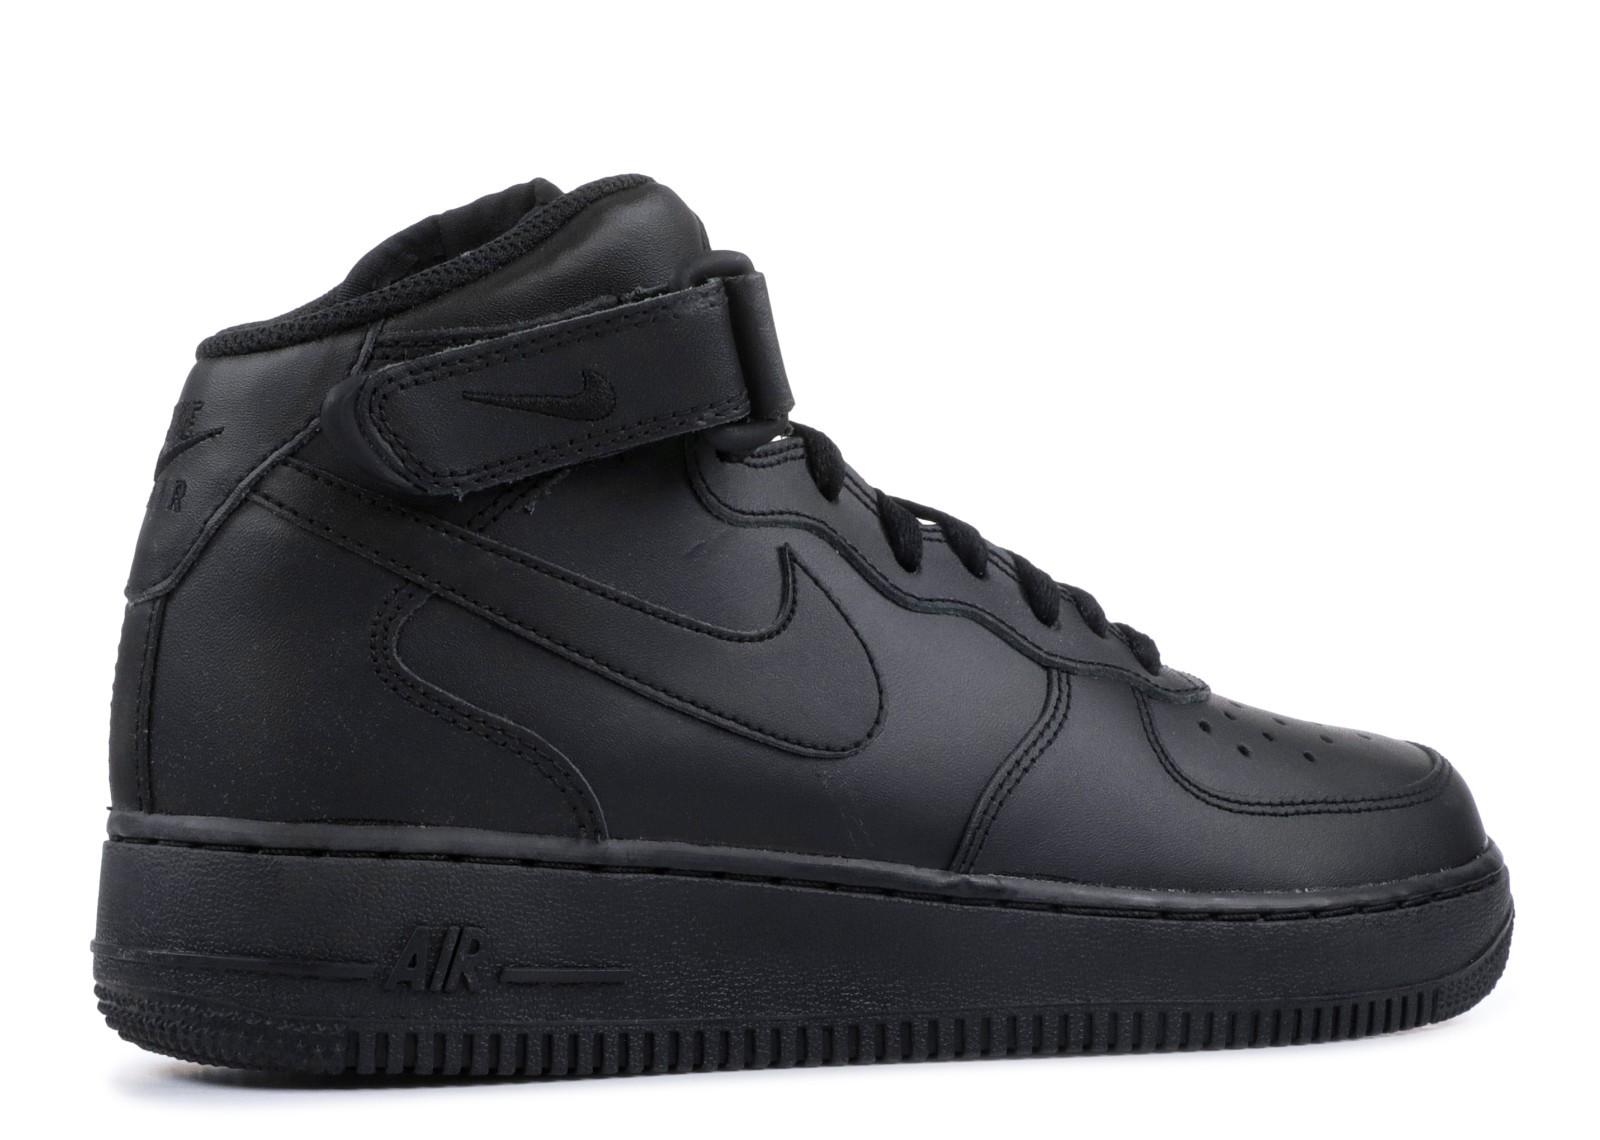 nike academy pack football boots for women - Nike Air Force 1 Mid 